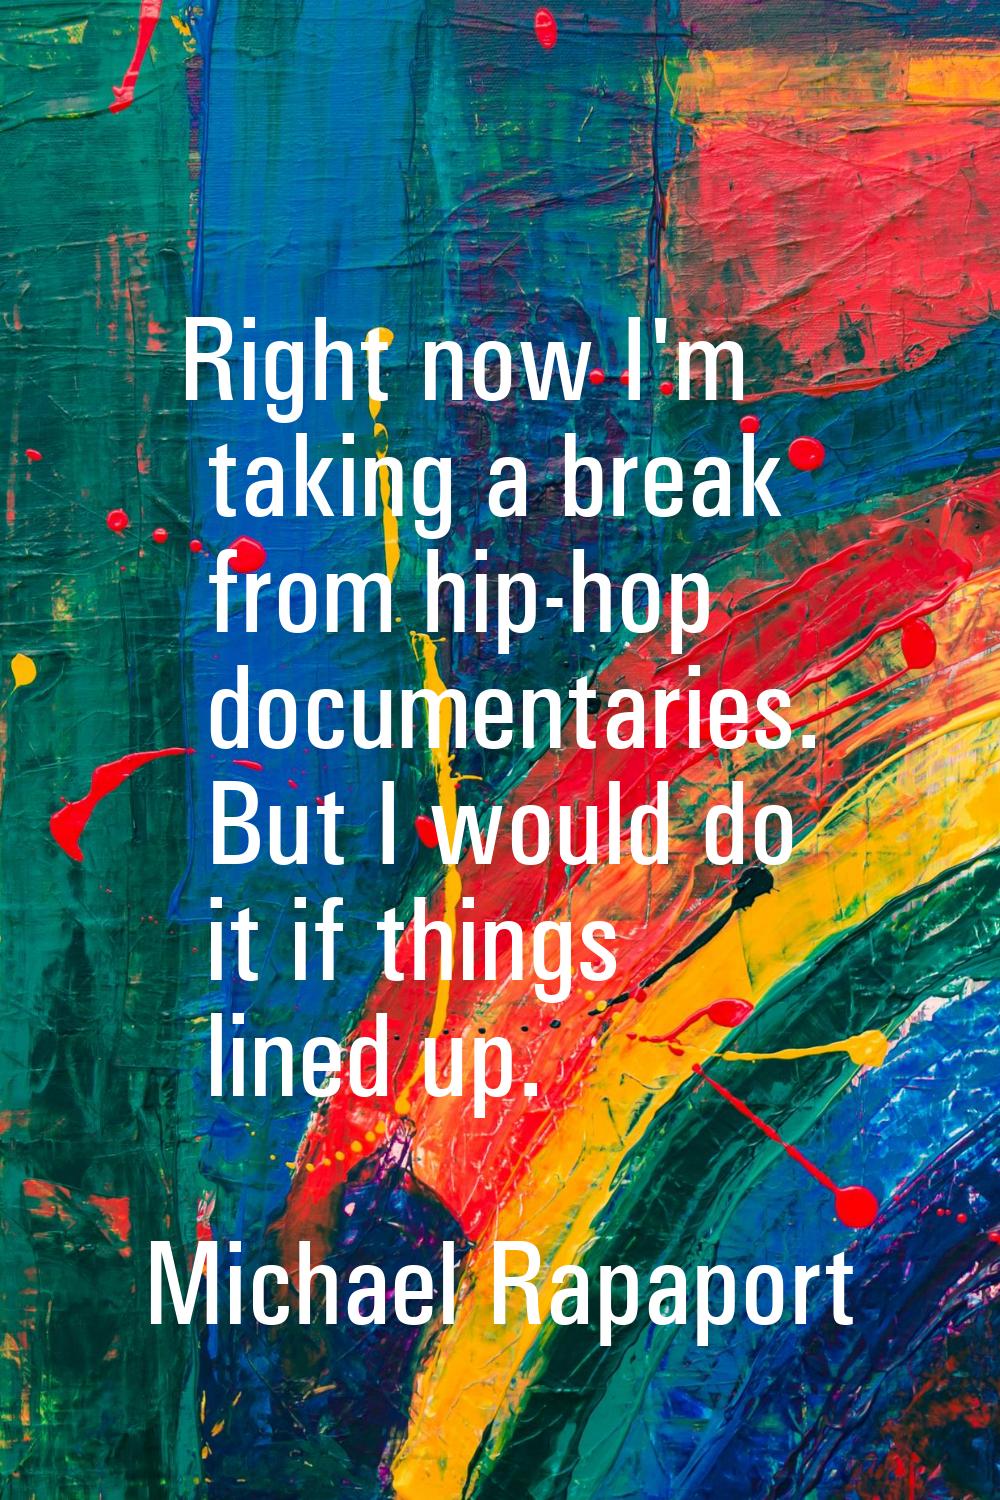 Right now I'm taking a break from hip-hop documentaries. But I would do it if things lined up.